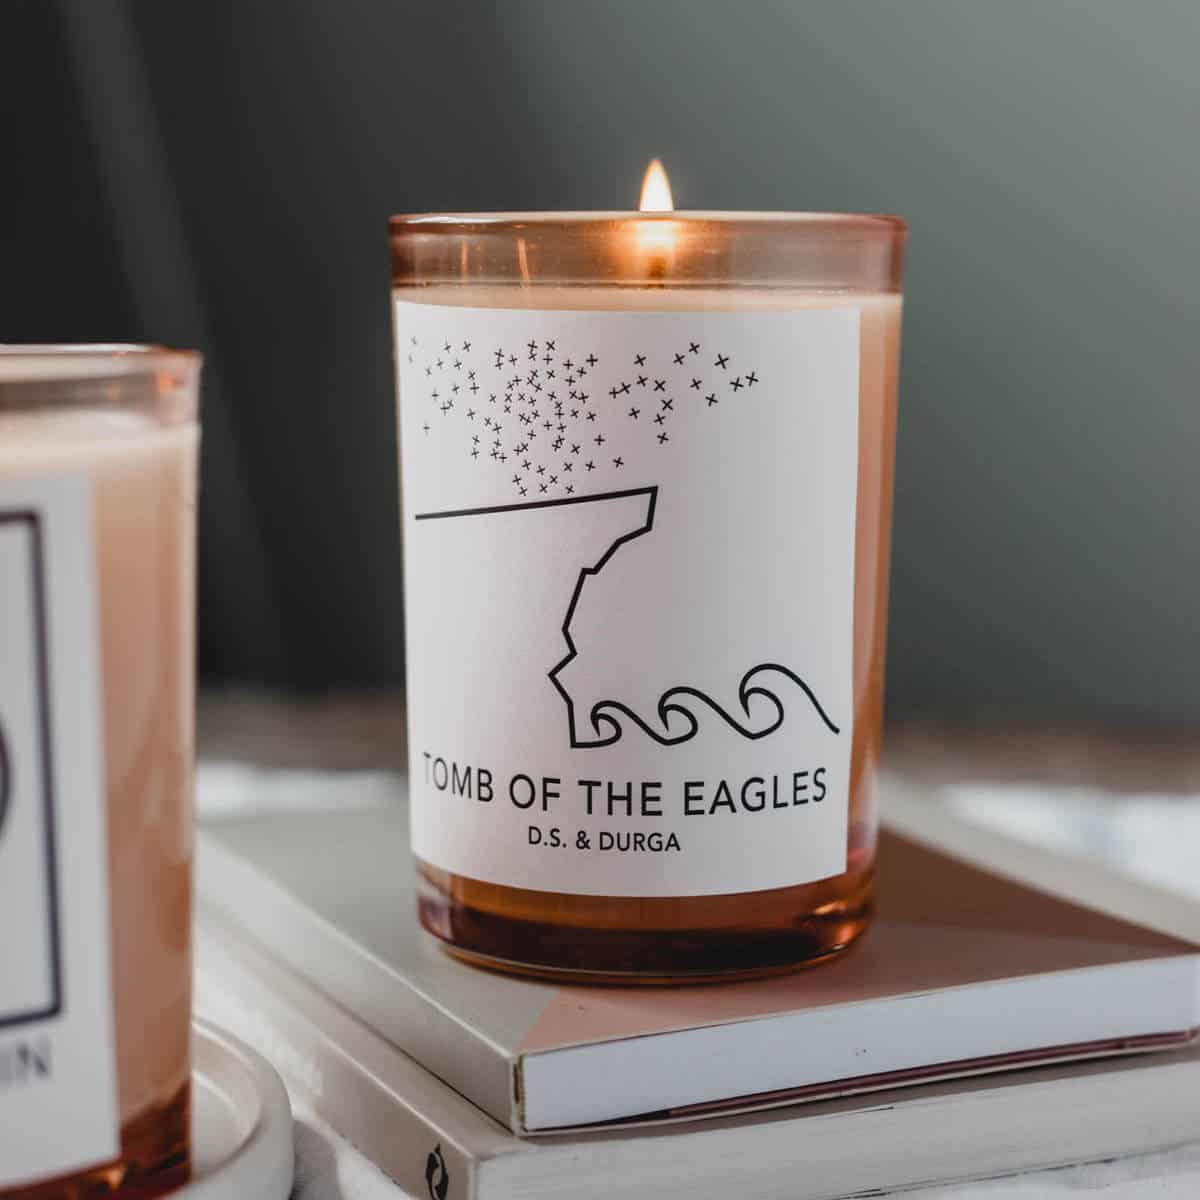 D.S. & DURGA Tomb of the Eagles Scented Candle - Osmology Scented Candles & Home Fragrance